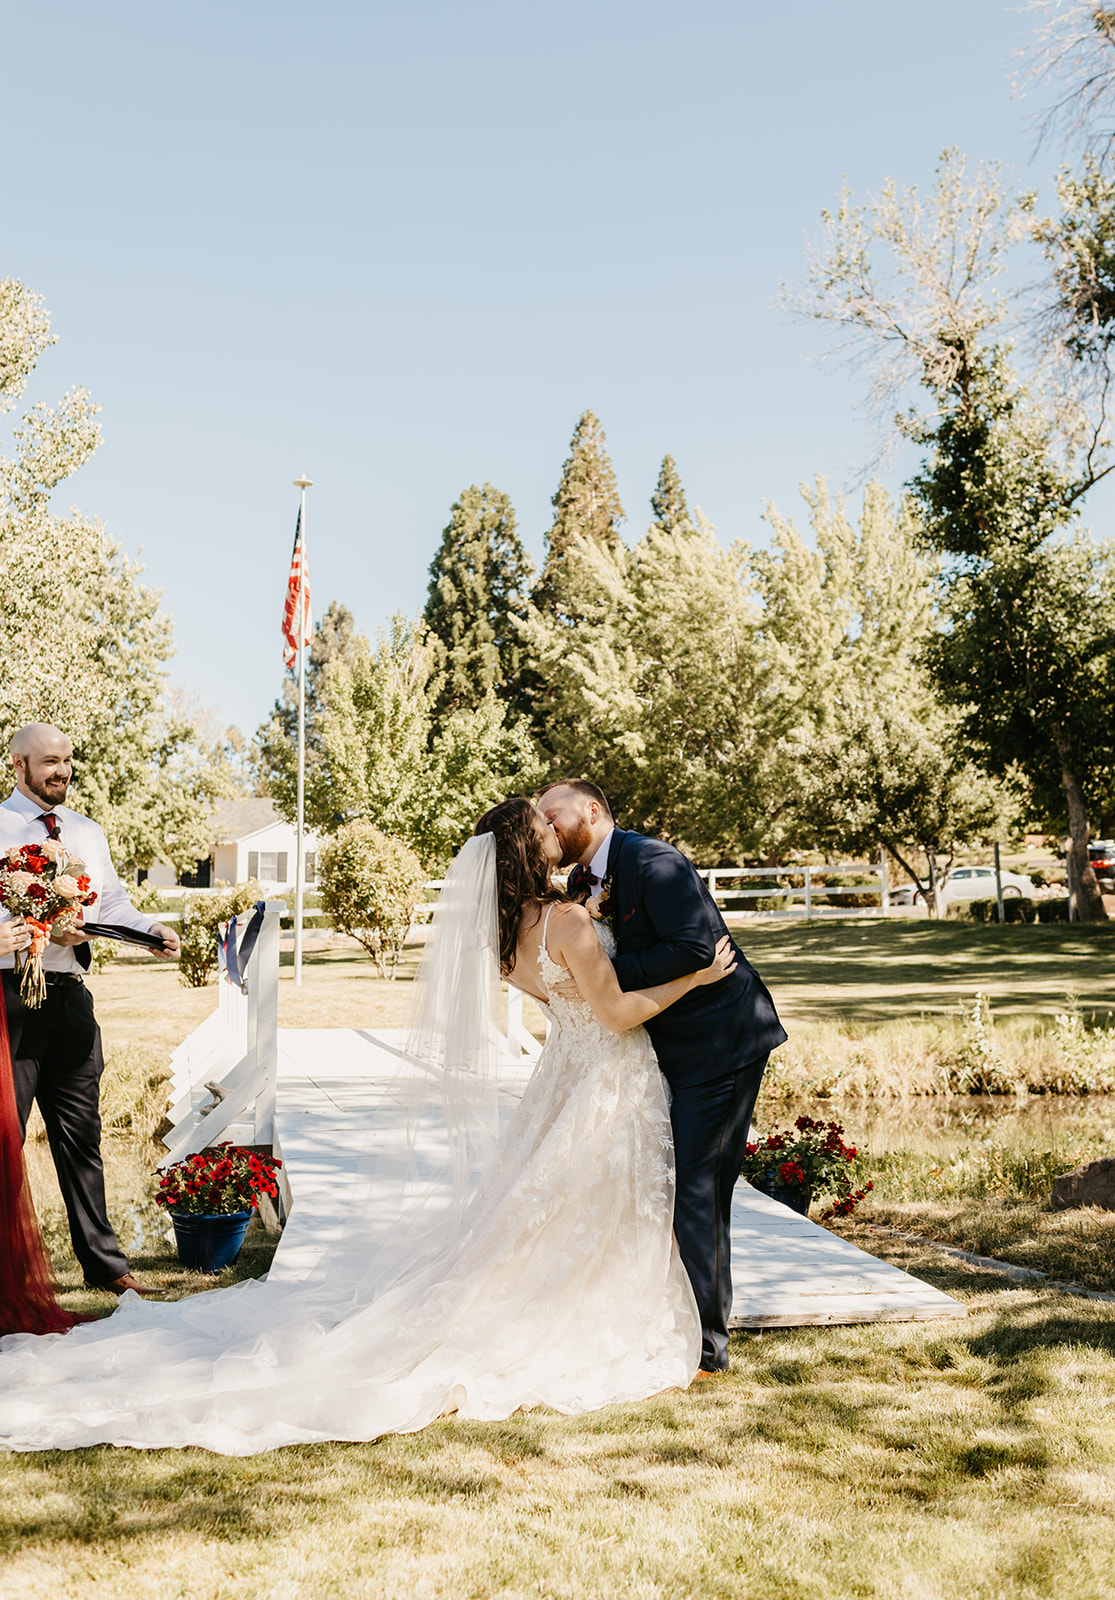 First kiss at a Ceremony during a reno nevada backyard wedding